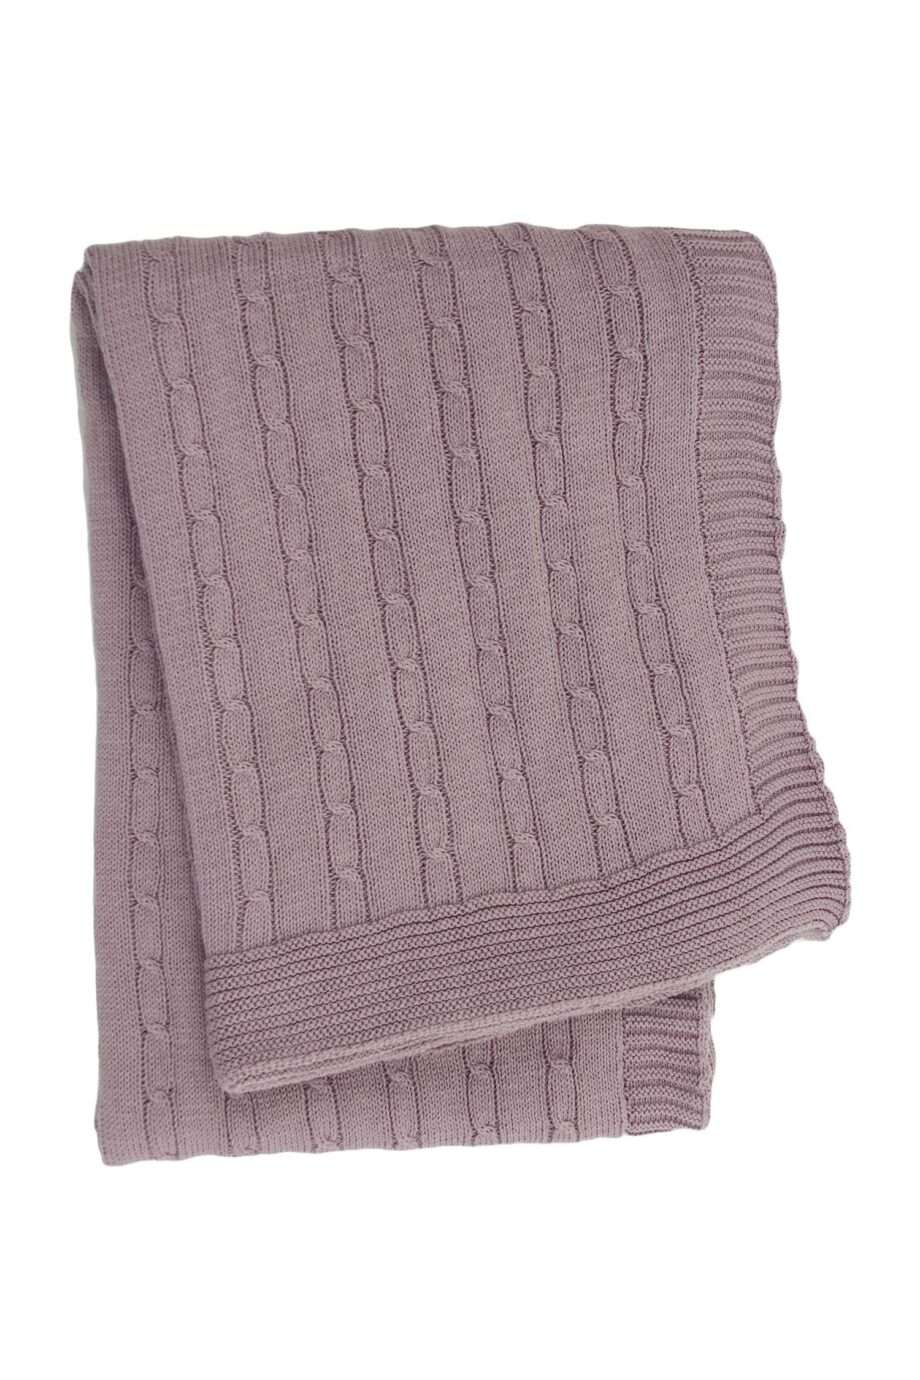 twist small violet knitted cotton little blanket small